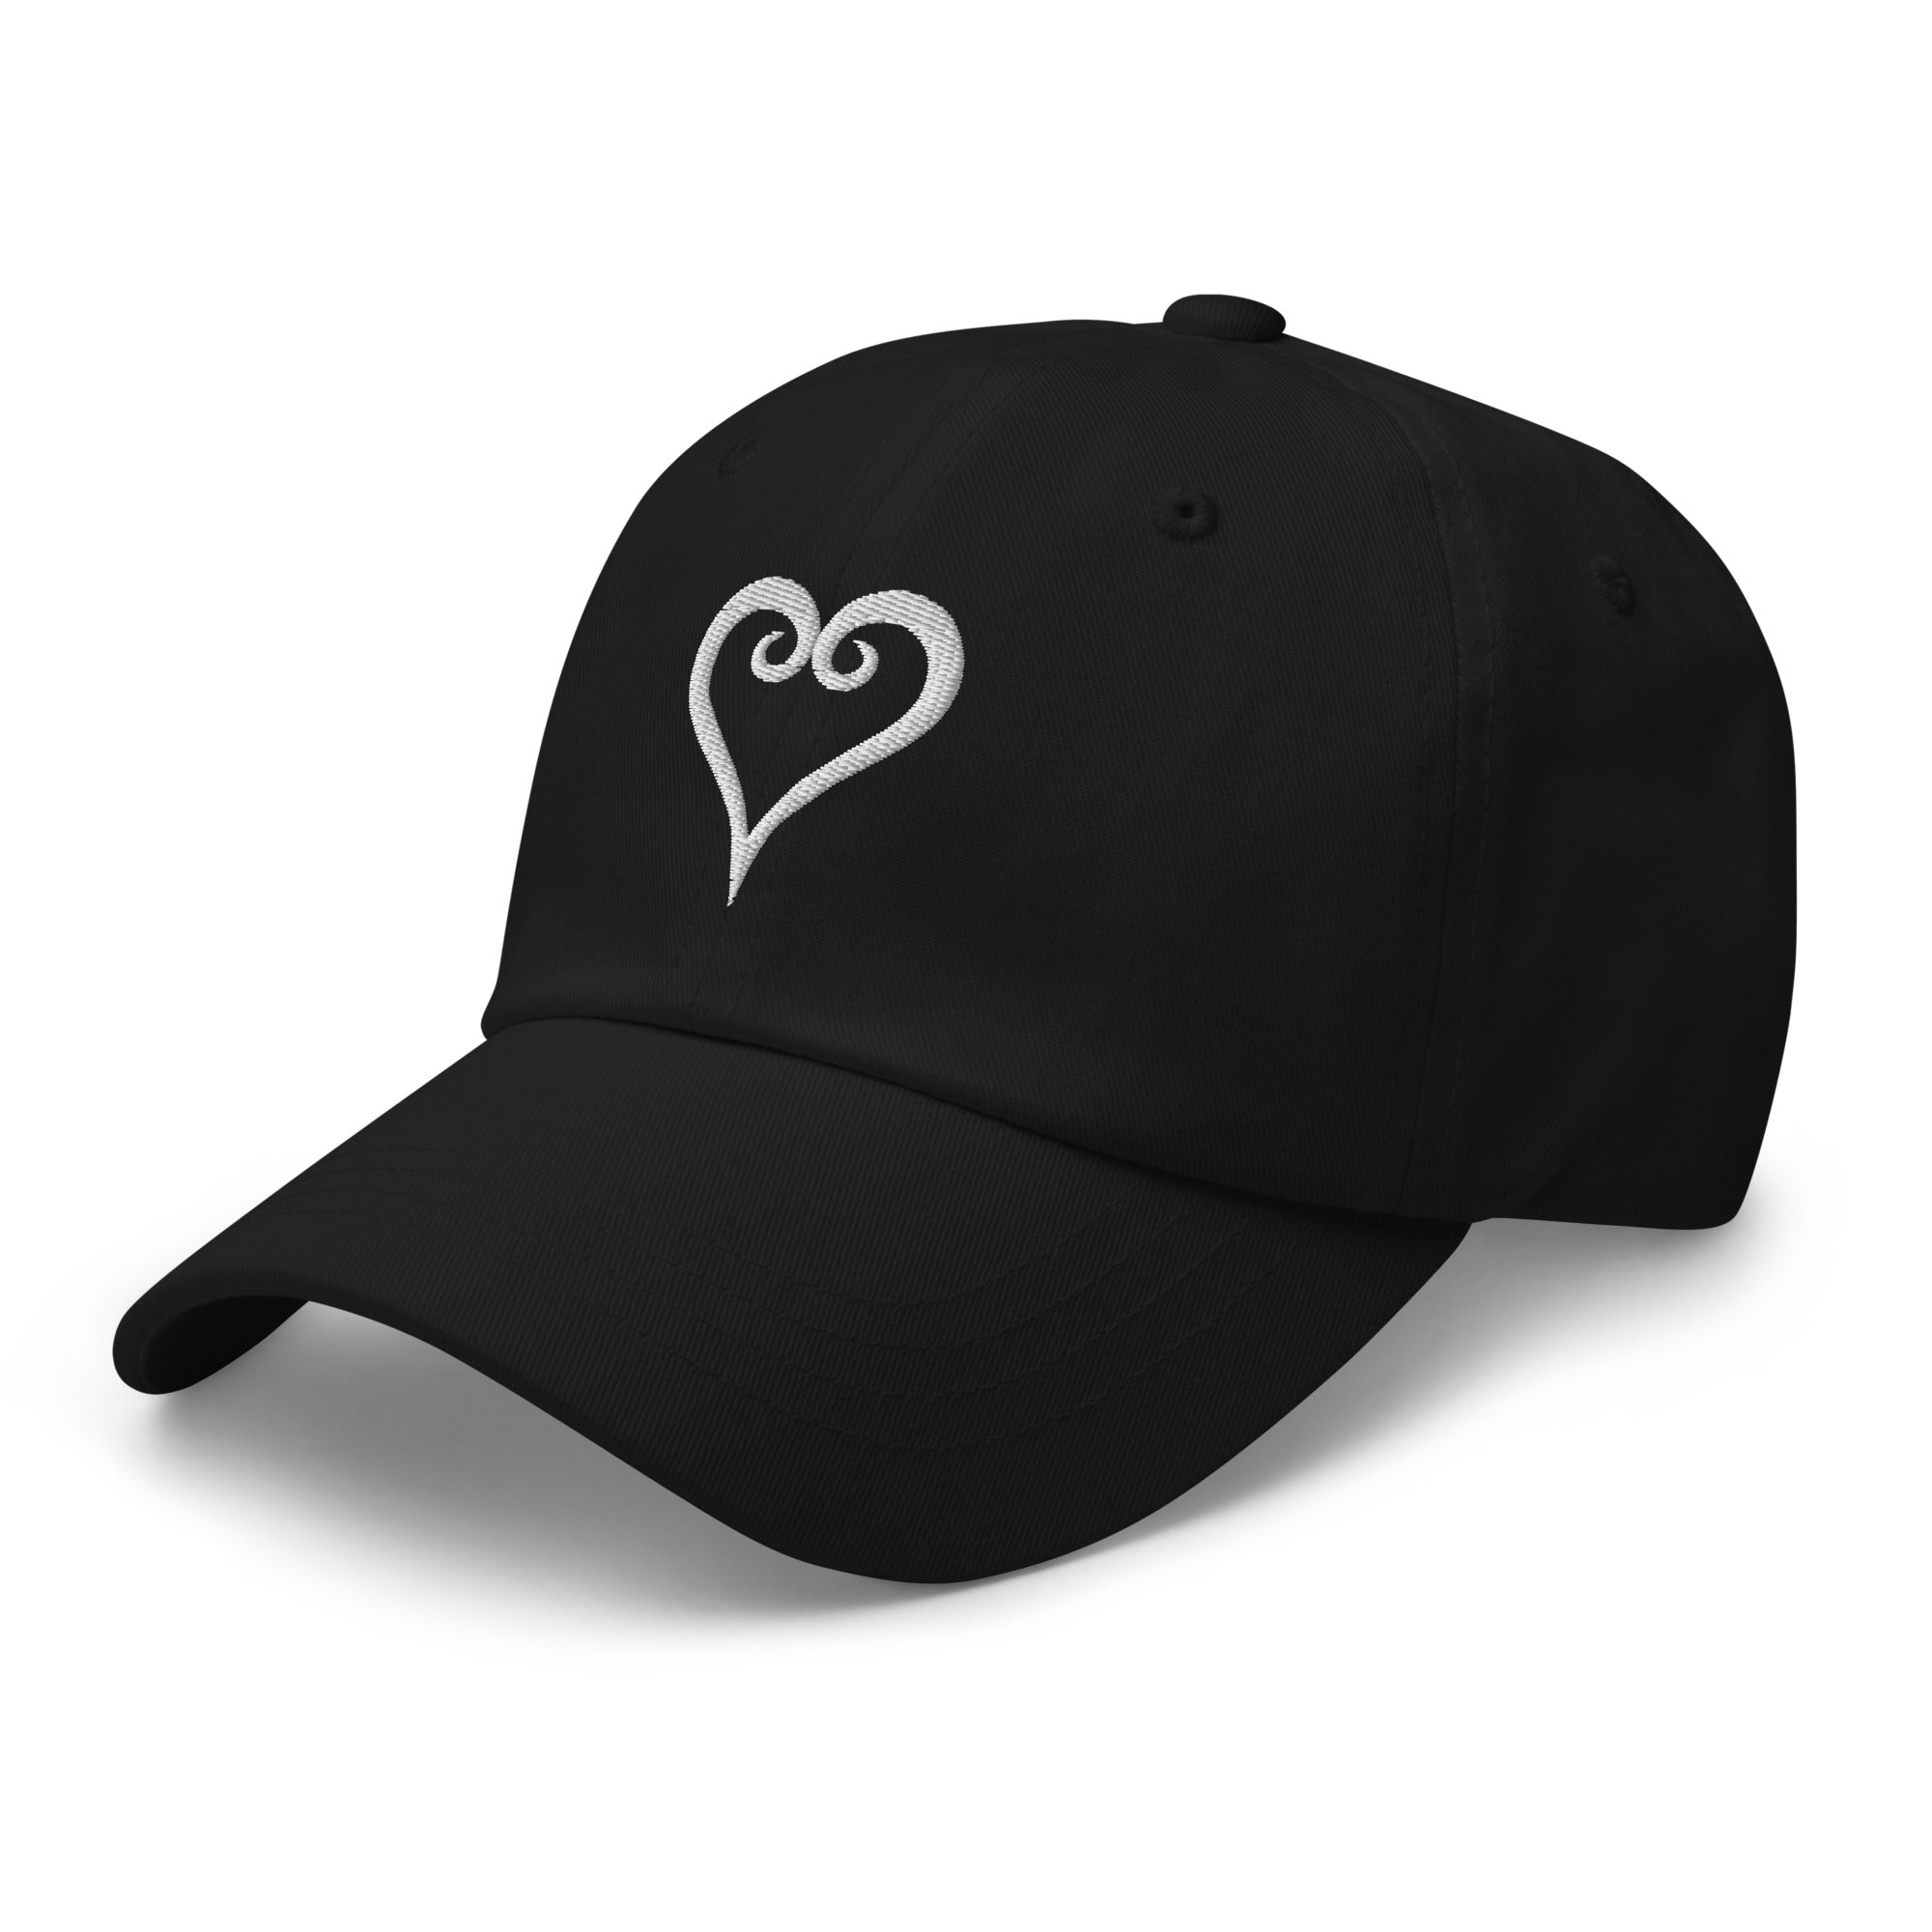 Kingdome Hearts Embroidered Baseball Cap Anime Style Game Dad hat - Edge of Life Designs